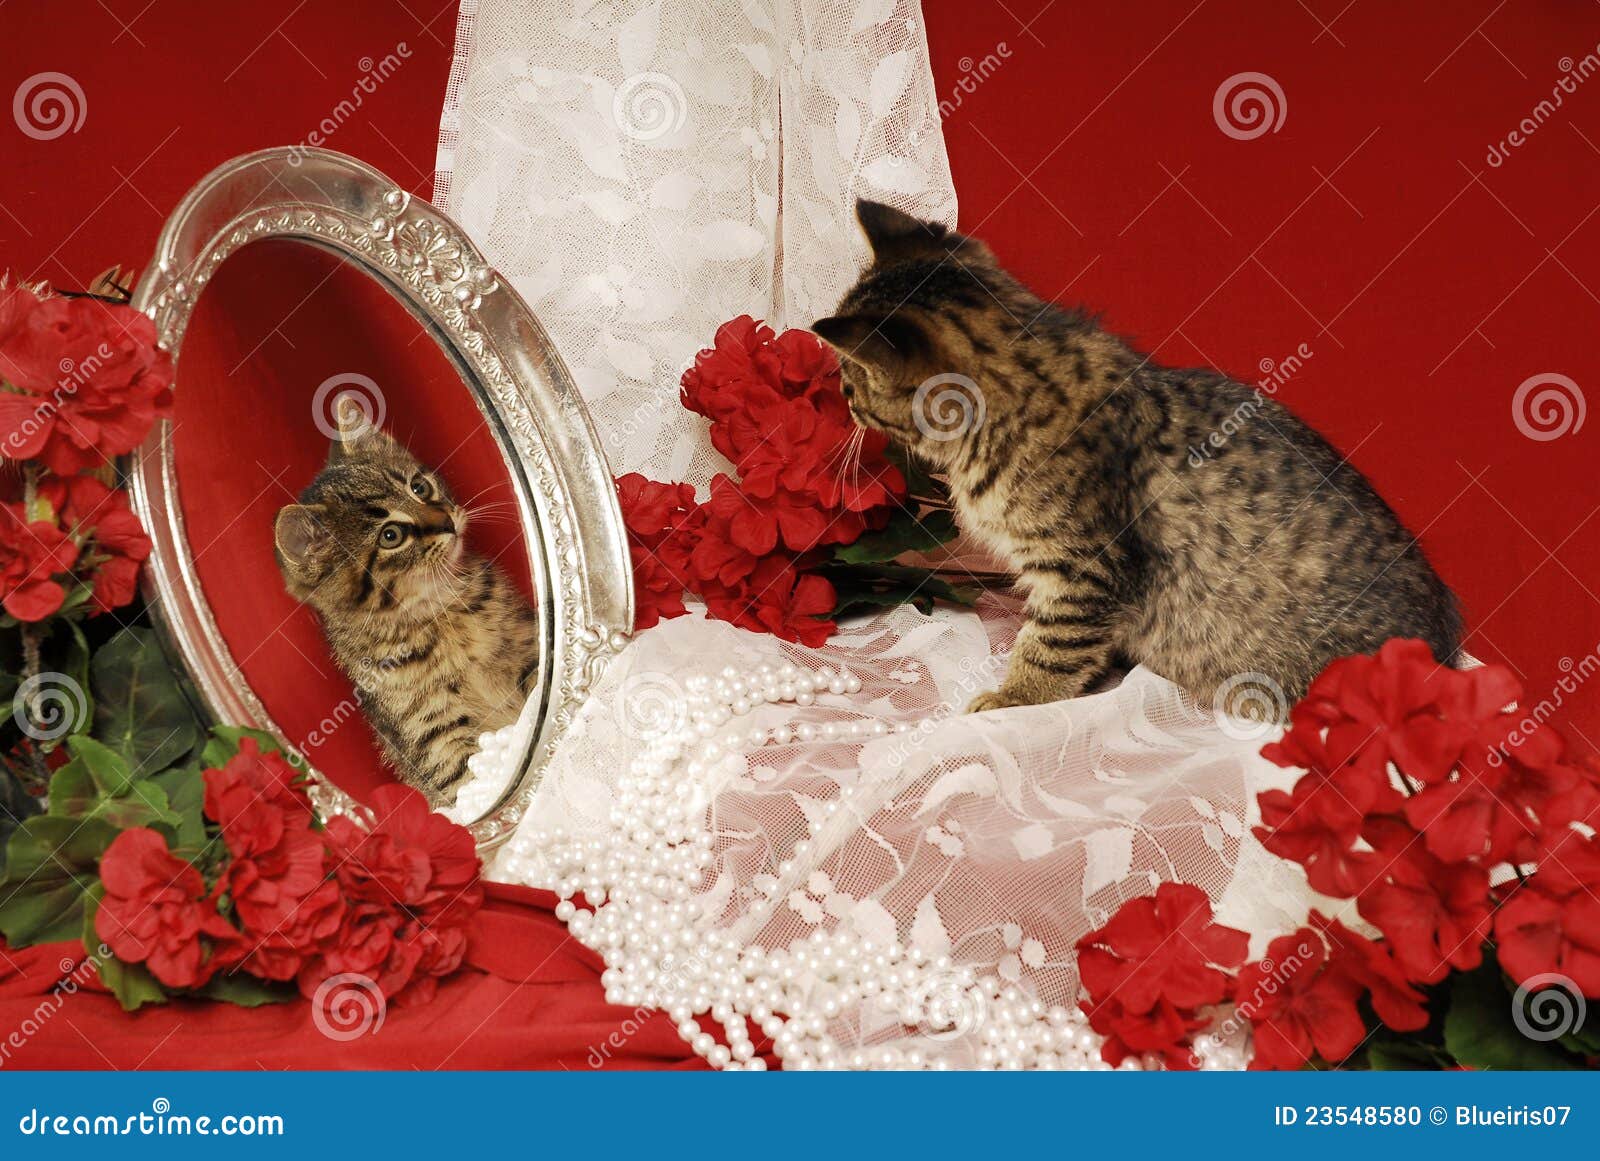 tiger kitten with mirror and begonias